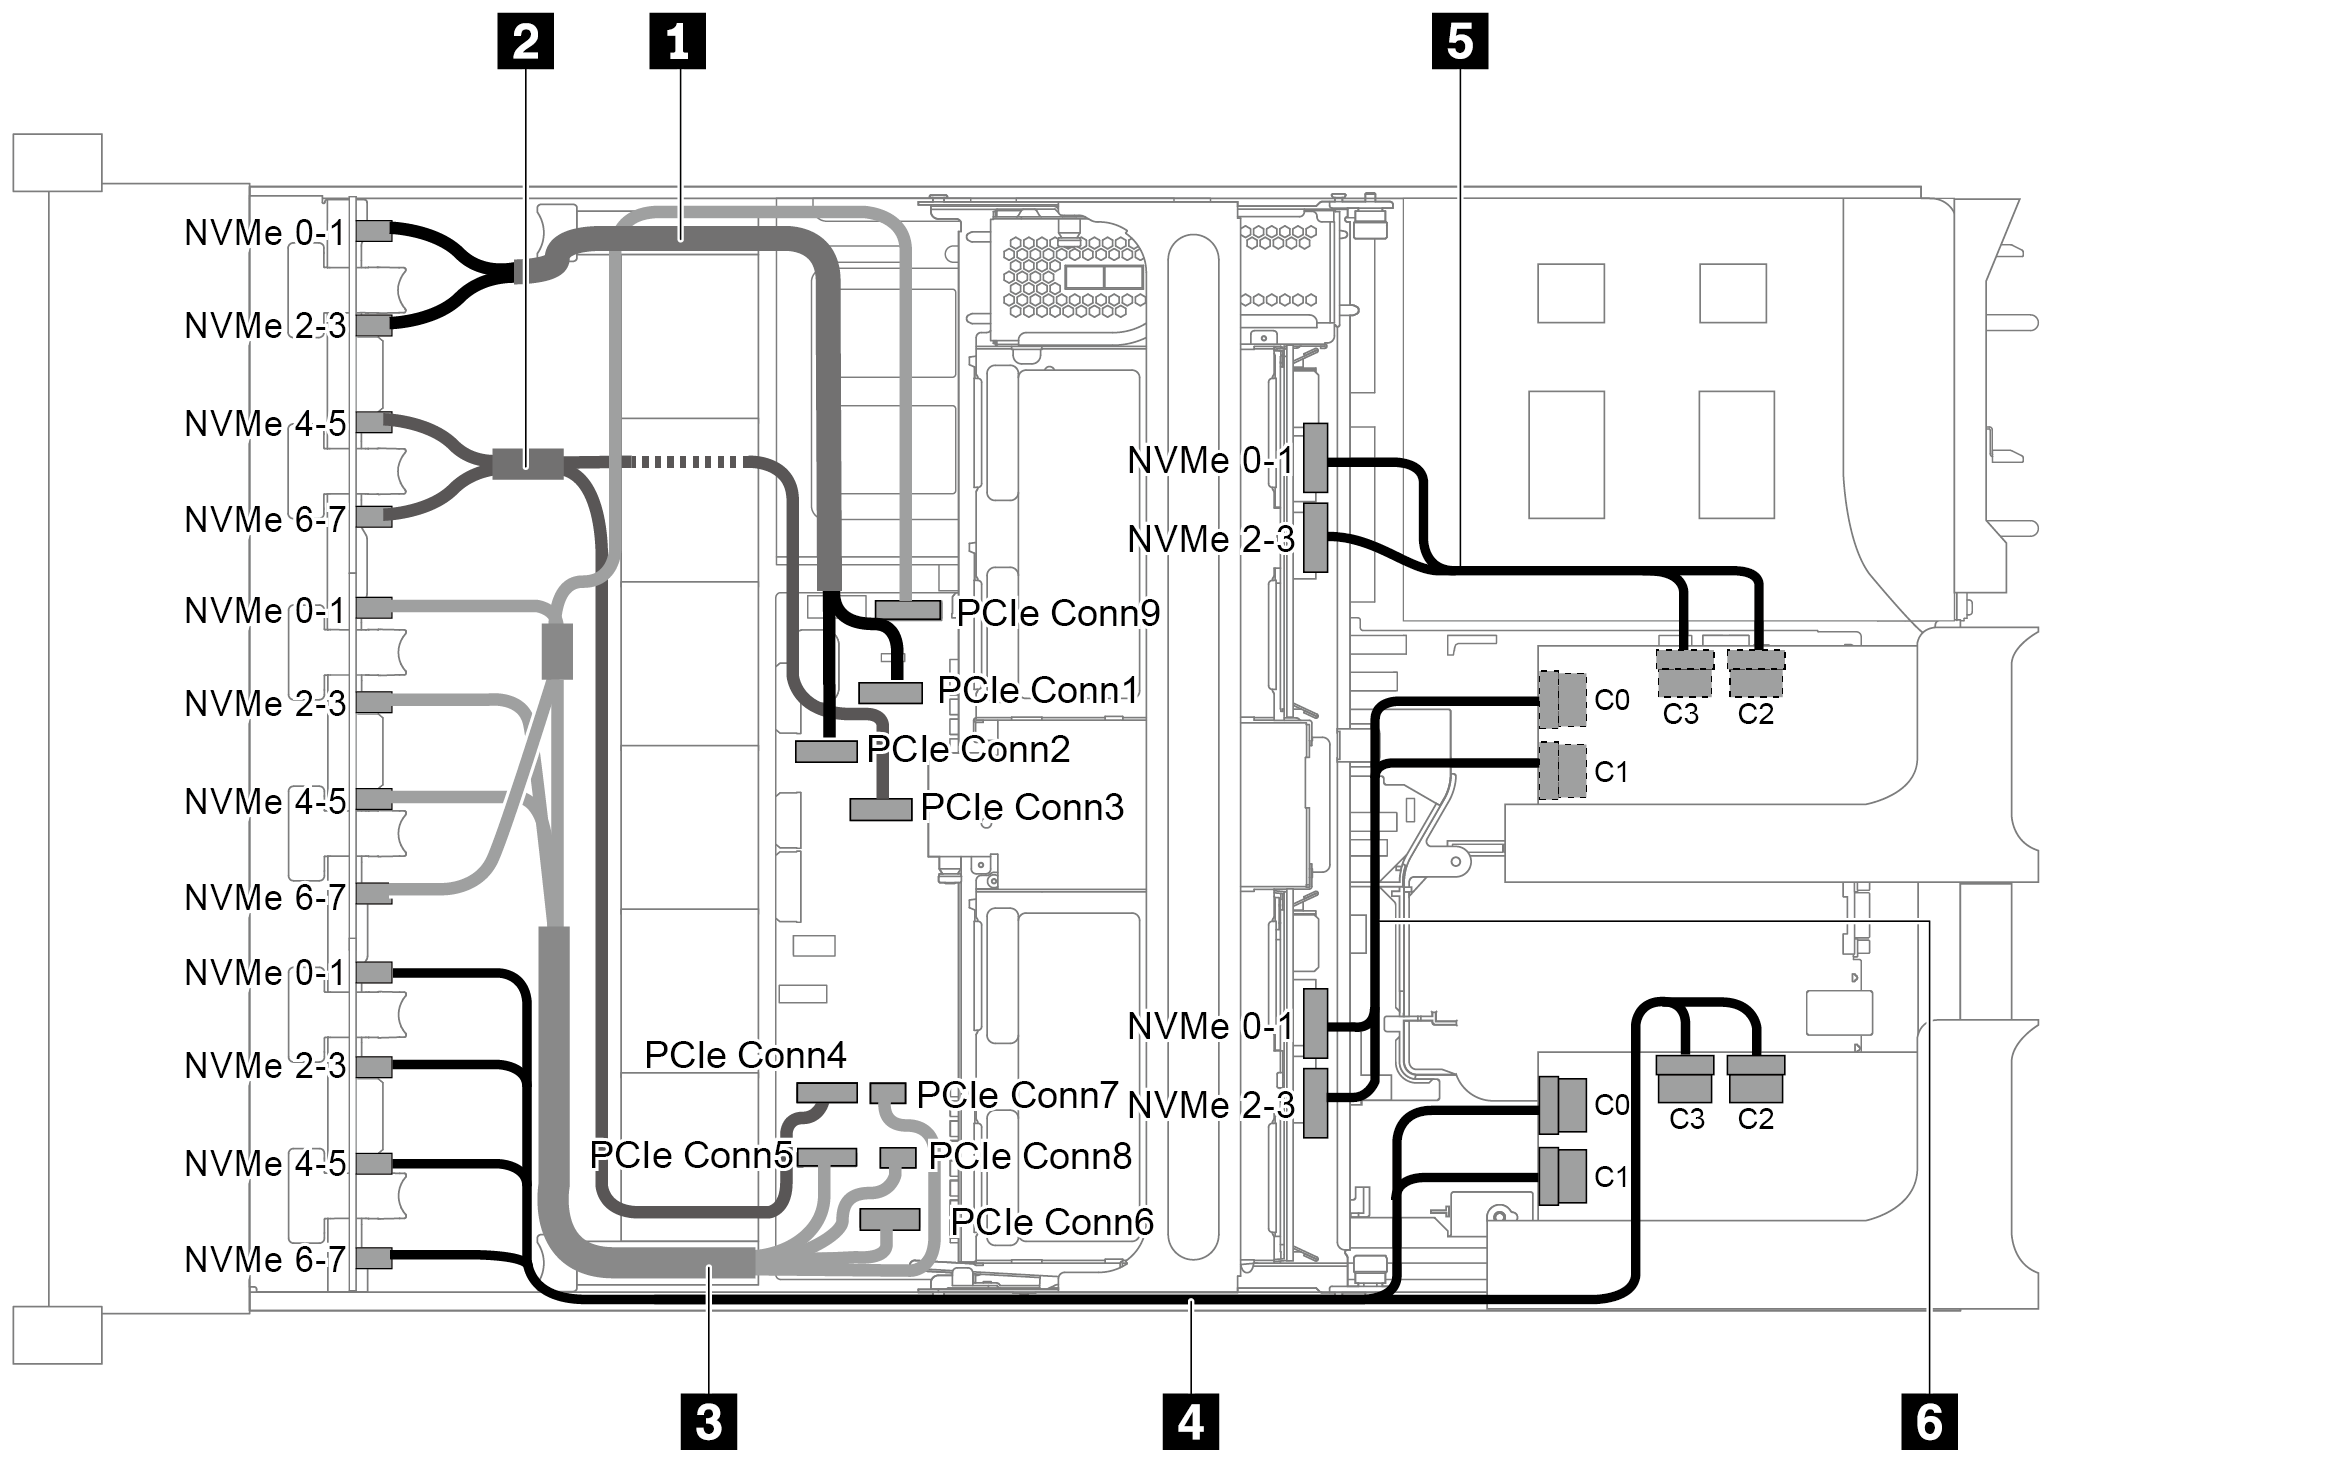 Cable routing for configuration with three 8 x 2.5" NVMe front backplanes, one middle drive cage (NVMe), and two 1611-8P NVMe switch cards